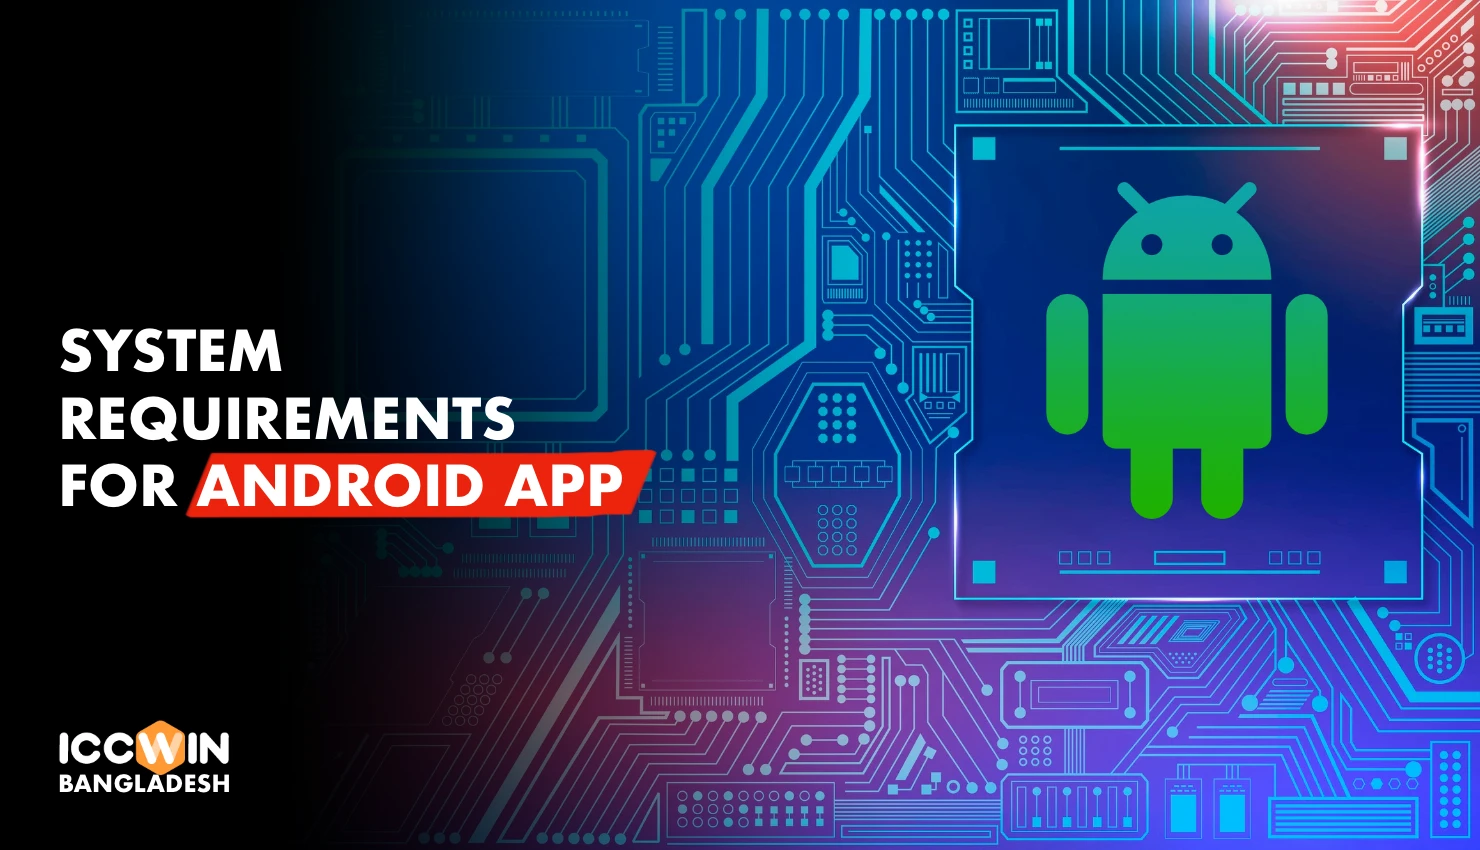 The main system requirements for Icc Win Android App